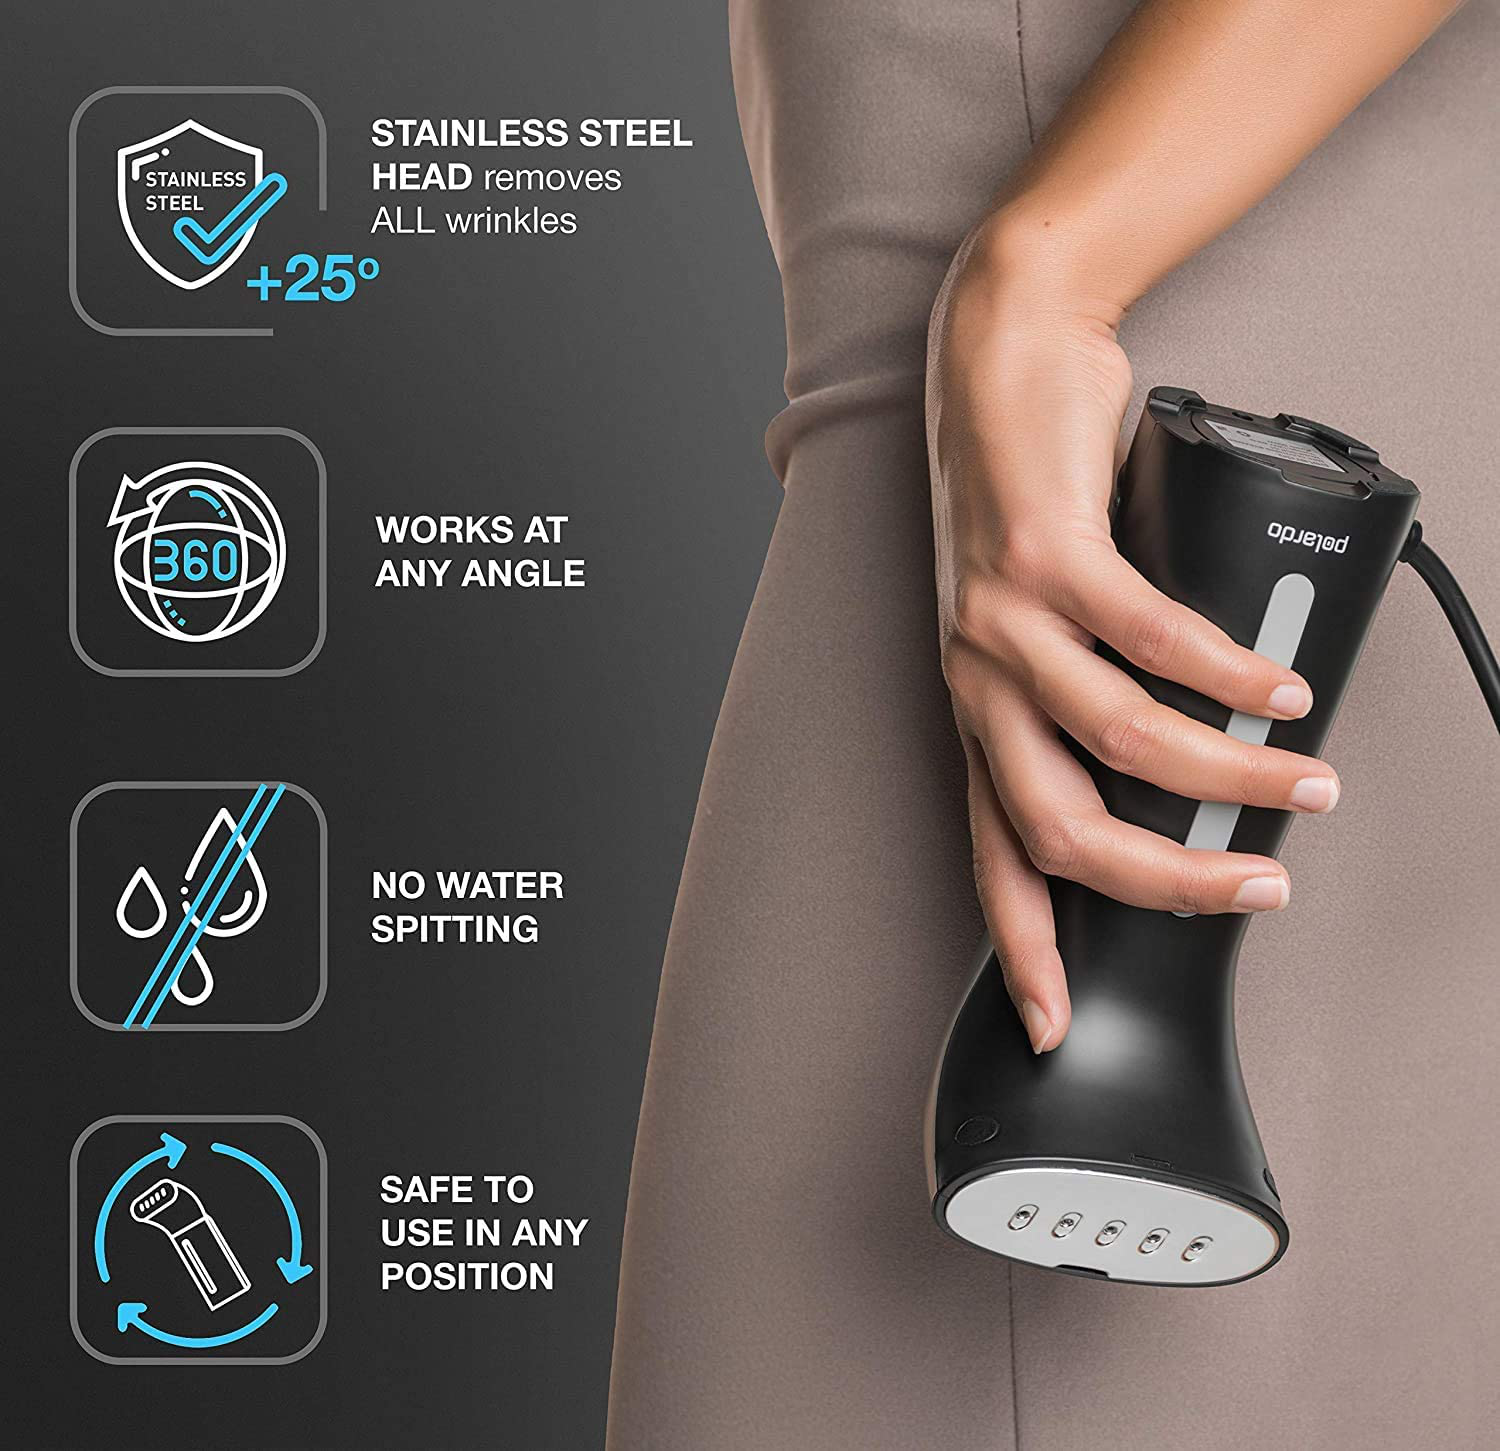 Steamer for Clothes, Hand Held Portable Travel Garment Steamer, Metal Steam Head, 25s Heat Up, Pump System, Mini Size, Handheld Steamer for Any Fabrics, No Water Spitting, 110V